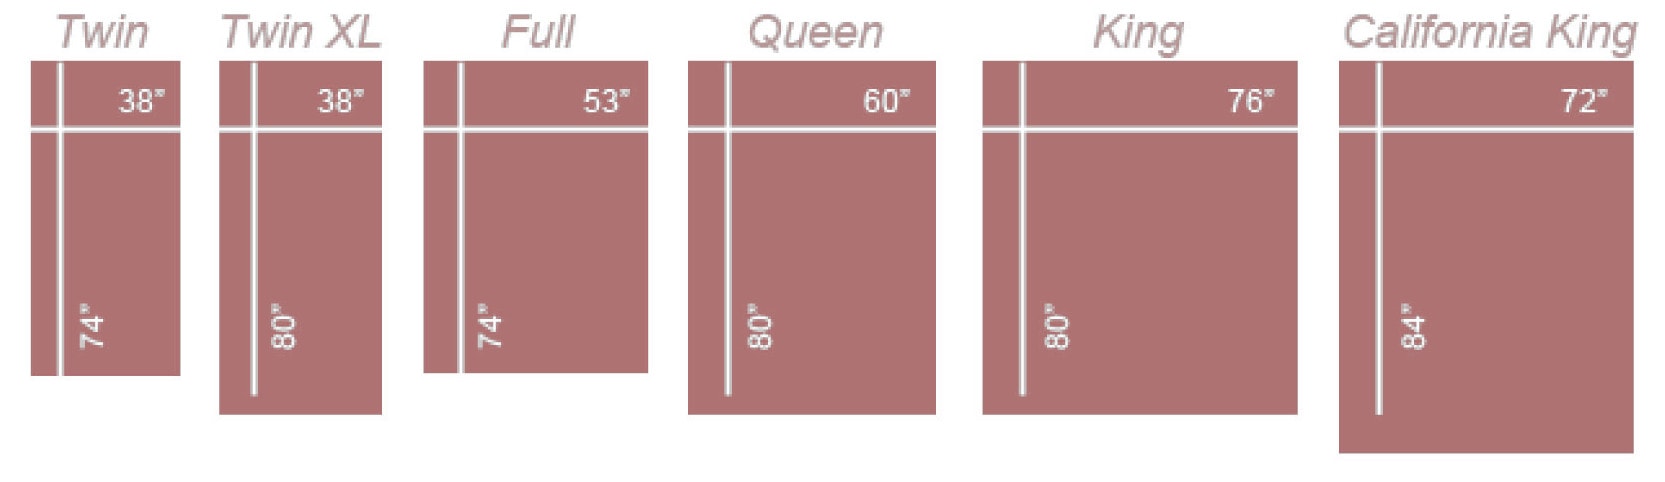 What Are The Standard Bed Sizes Quora